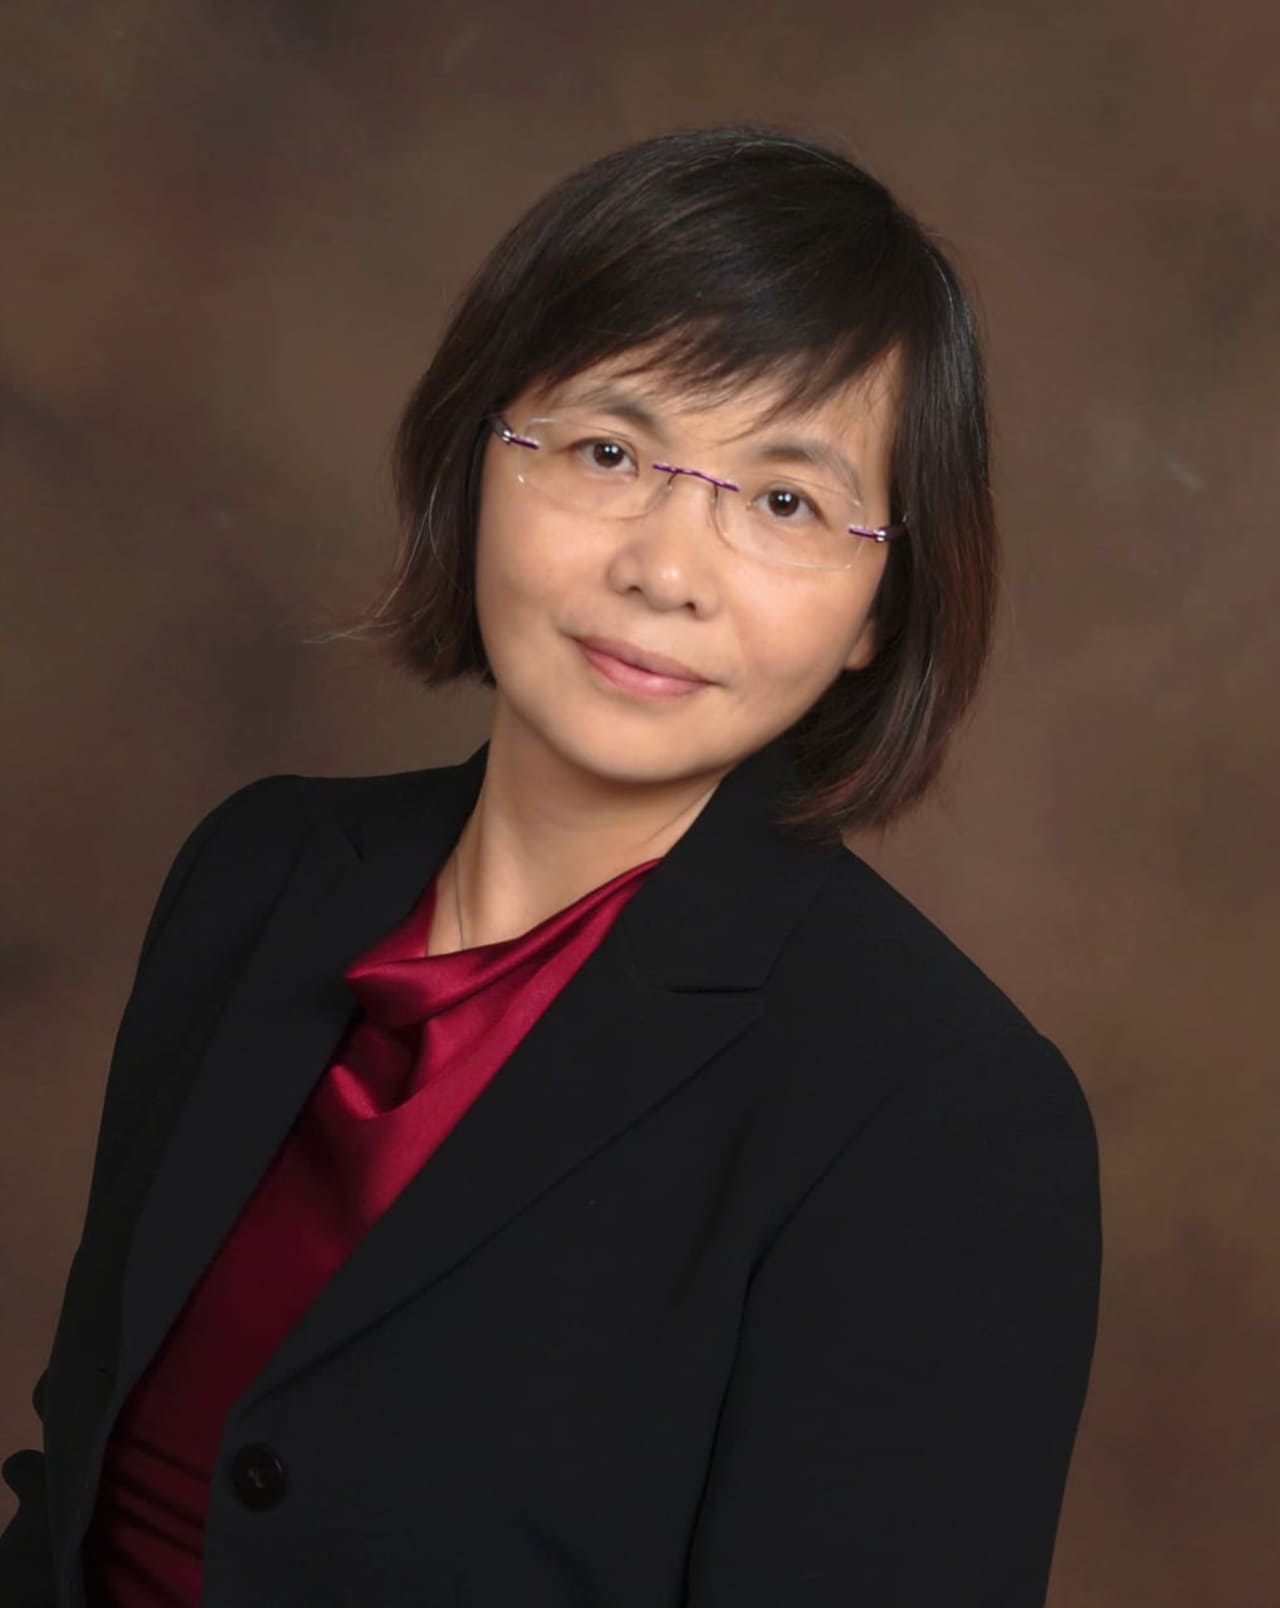 Research scientist Rong Xu has dedicated her career to finding cures for some of the world's most dangerous viruses including HIV, HCV, Malaria and Ebola.